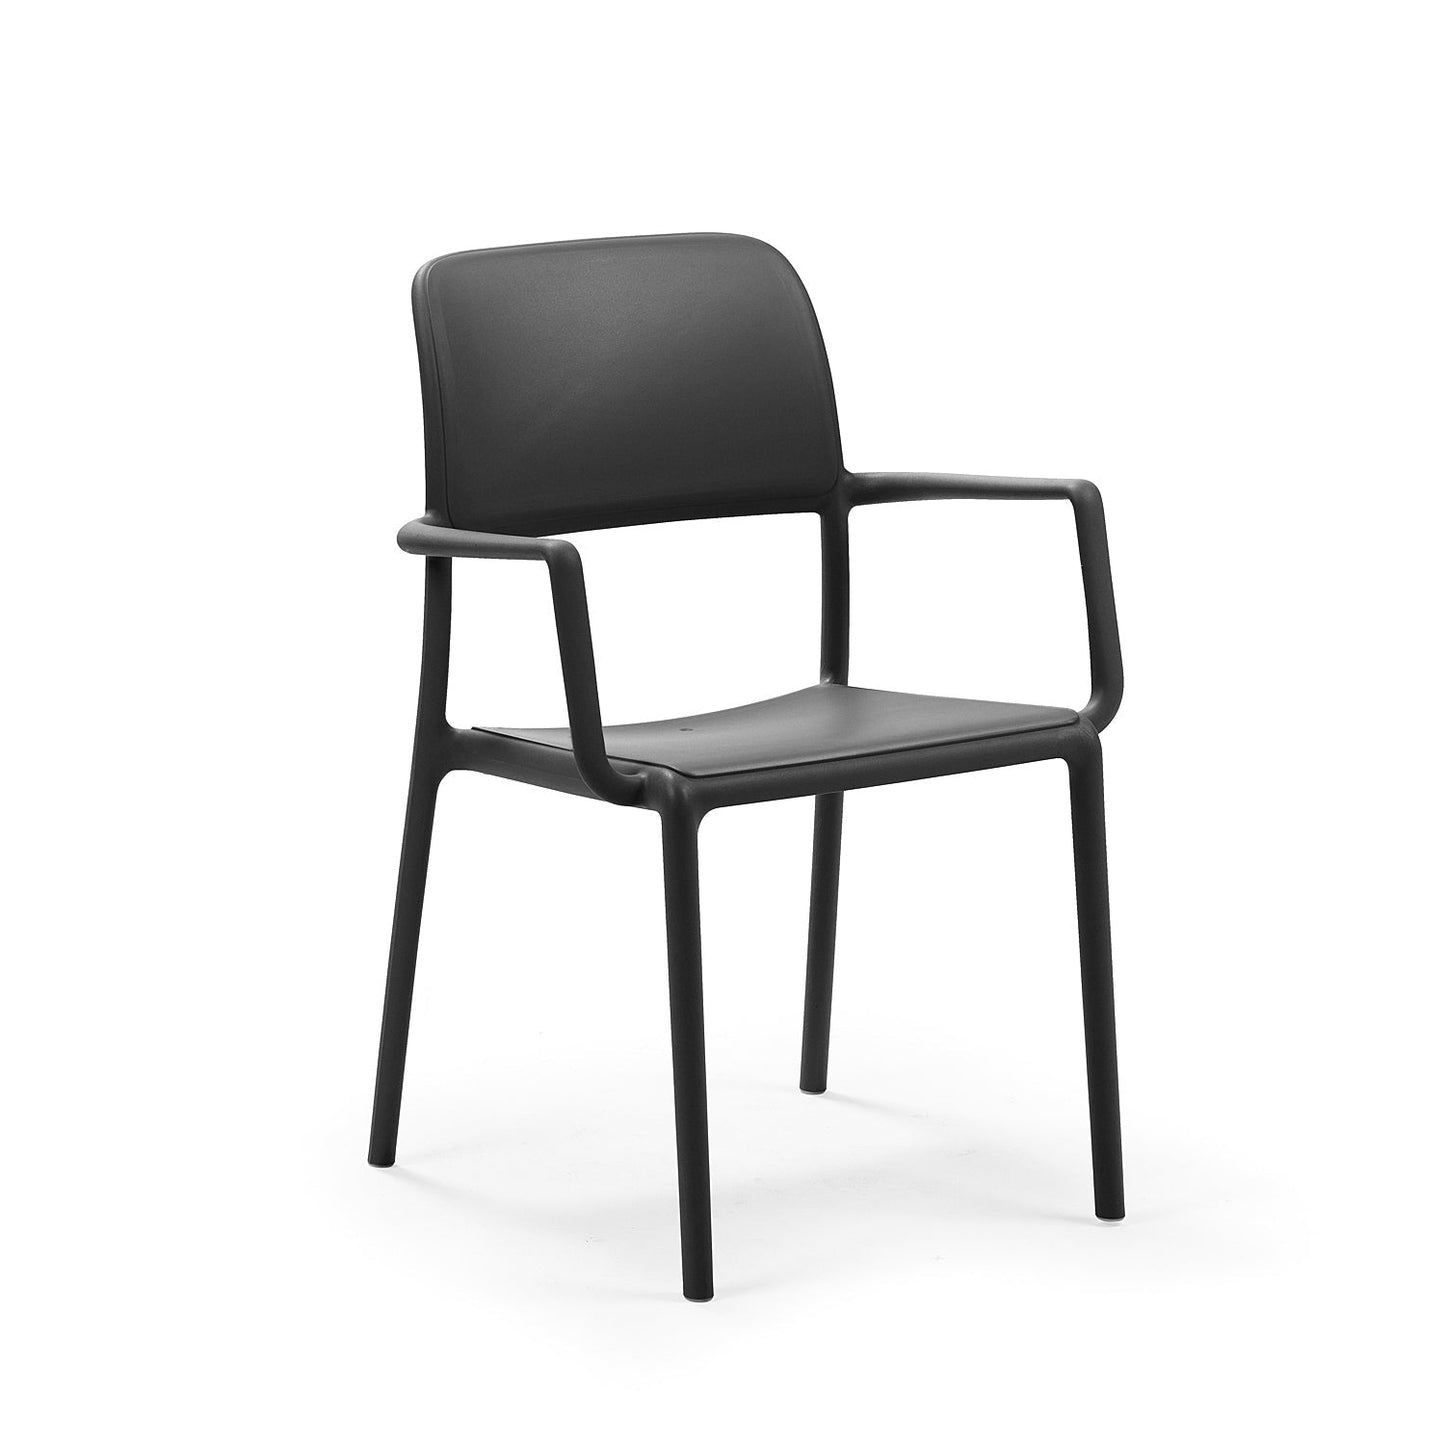 Riva Garden Chair By Nardi In Anthracite